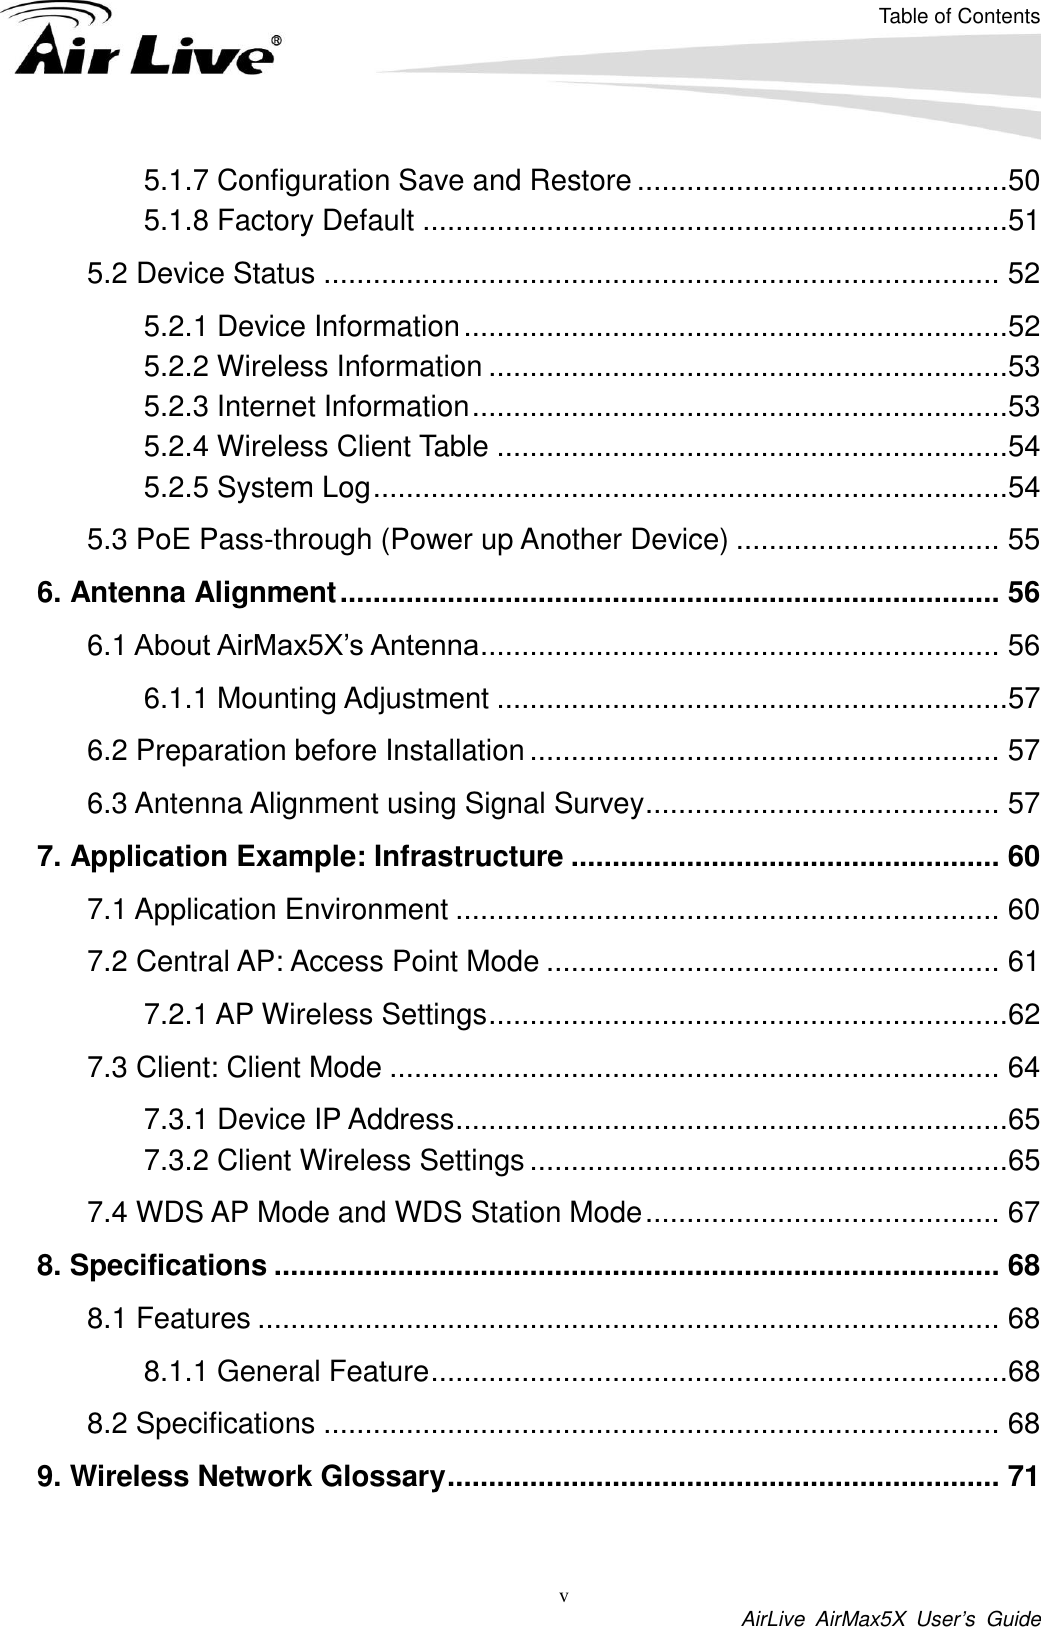 Table of Contents v  AirLive  AirMax5X  User’s  Guide 5.1.7 Configuration Save and Restore .............................................50 5.1.8 Factory Default .......................................................................51 5.2 Device Status .................................................................................. 52 5.2.1 Device Information ..................................................................52 5.2.2 Wireless Information ...............................................................53 5.2.3 Internet Information .................................................................53 5.2.4 Wireless Client Table ..............................................................54 5.2.5 System Log .............................................................................54 5.3 PoE Pass-through (Power up Another Device) ................................ 55 6. Antenna Alignment ................................................................................ 56 6.1 About AirMax5X’s Antenna ............................................................... 56 6.1.1 Mounting Adjustment ..............................................................57 6.2 Preparation before Installation ......................................................... 57 6.3 Antenna Alignment using Signal Survey ........................................... 57 7. Application Example: Infrastructure .................................................... 60 7.1 Application Environment .................................................................. 60 7.2 Central AP: Access Point Mode ....................................................... 61 7.2.1 AP Wireless Settings ...............................................................62 7.3 Client: Client Mode .......................................................................... 64 7.3.1 Device IP Address ...................................................................65 7.3.2 Client Wireless Settings ..........................................................65 7.4 WDS AP Mode and WDS Station Mode ........................................... 67 8. Specifications ........................................................................................ 68 8.1 Features .......................................................................................... 68 8.1.1 General Feature ......................................................................68 8.2 Specifications .................................................................................. 68 9. Wireless Network Glossary ................................................................... 71  